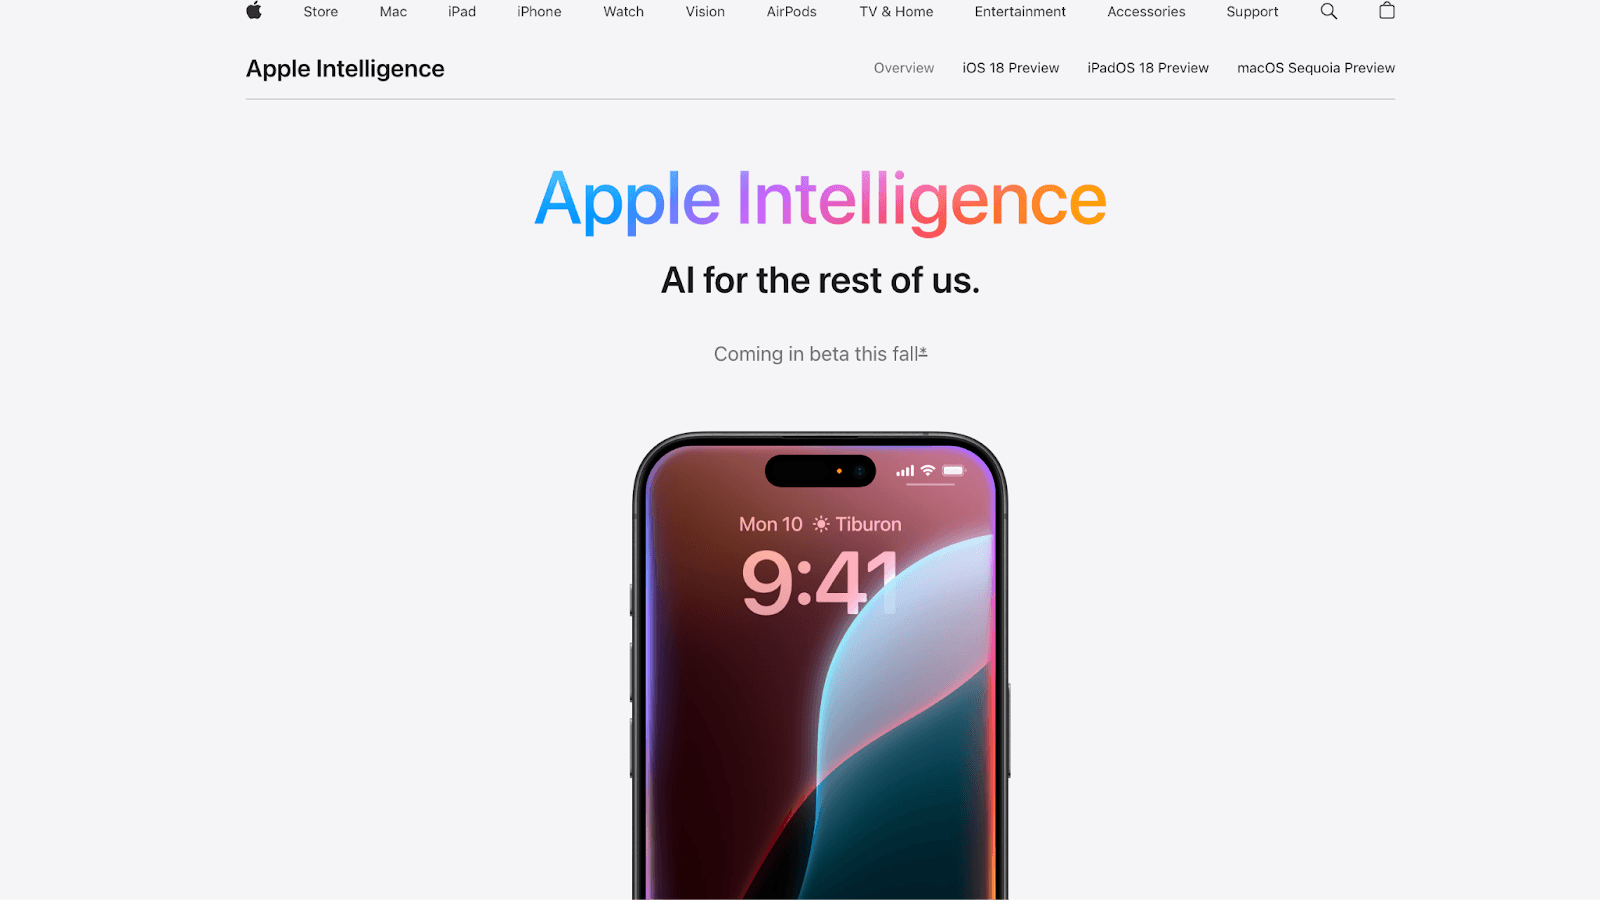 Apple Intelligence website page as an example of Product Marketing Strategies